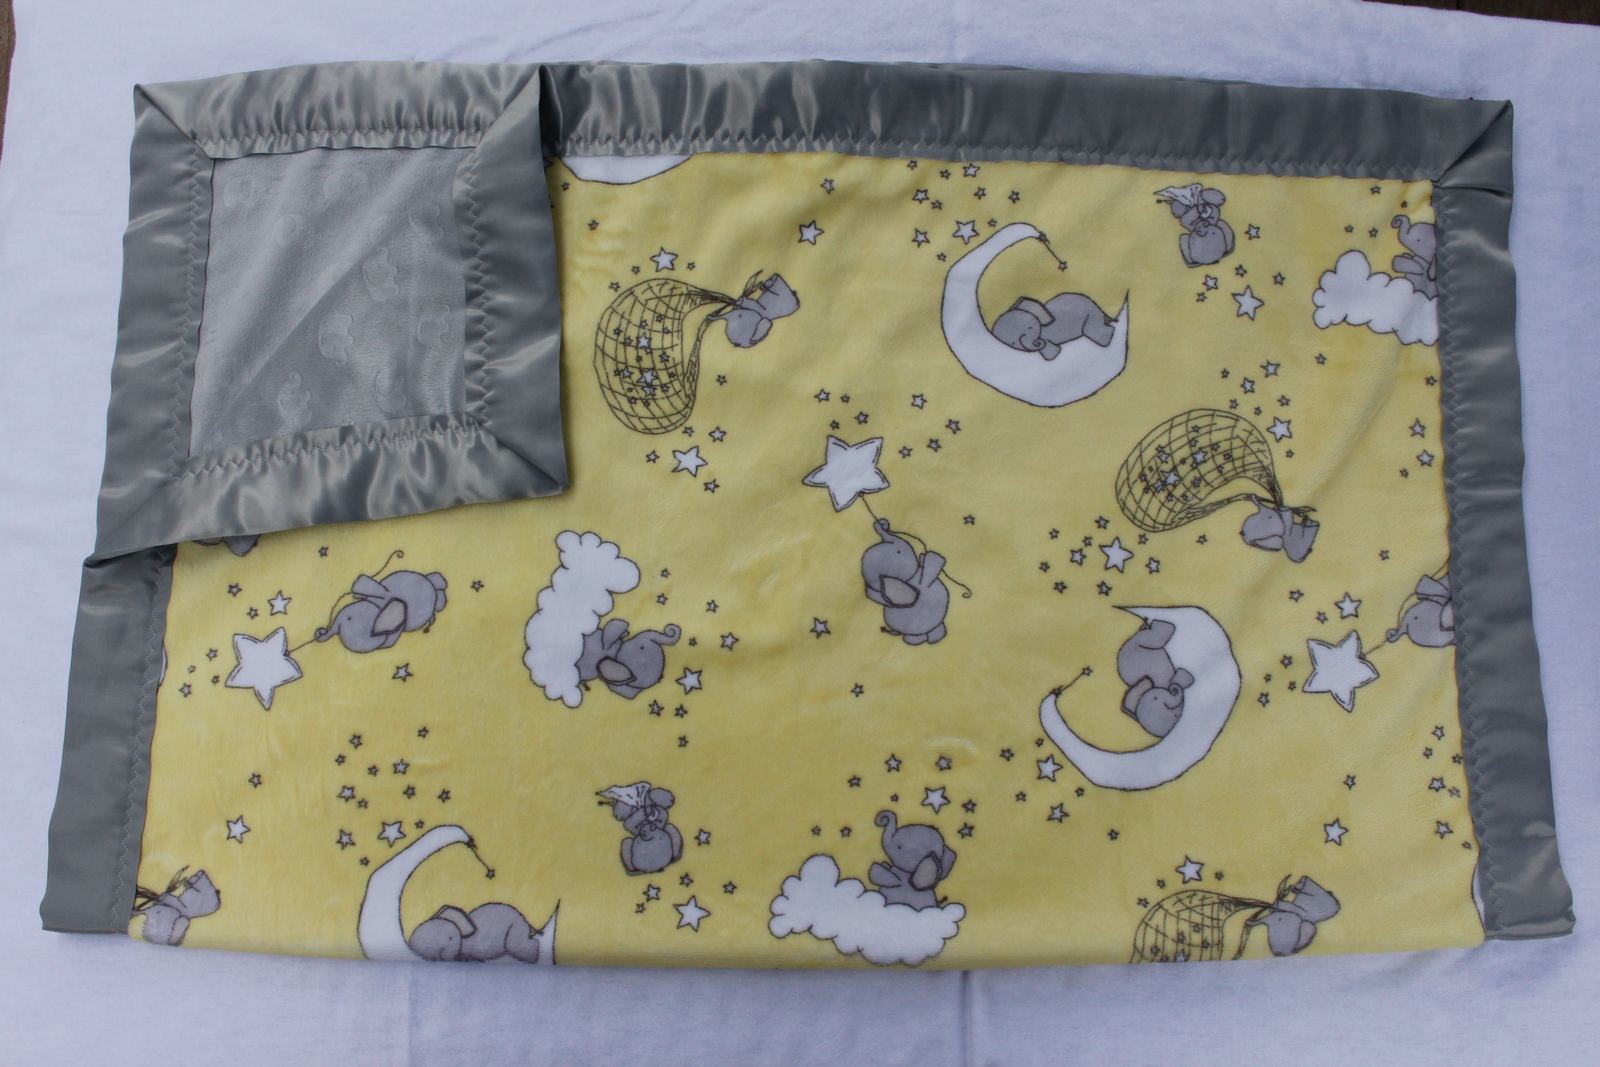 Primary image for Minky baby blanket - small - elephants - moon - clouds - yellow - gray - standar